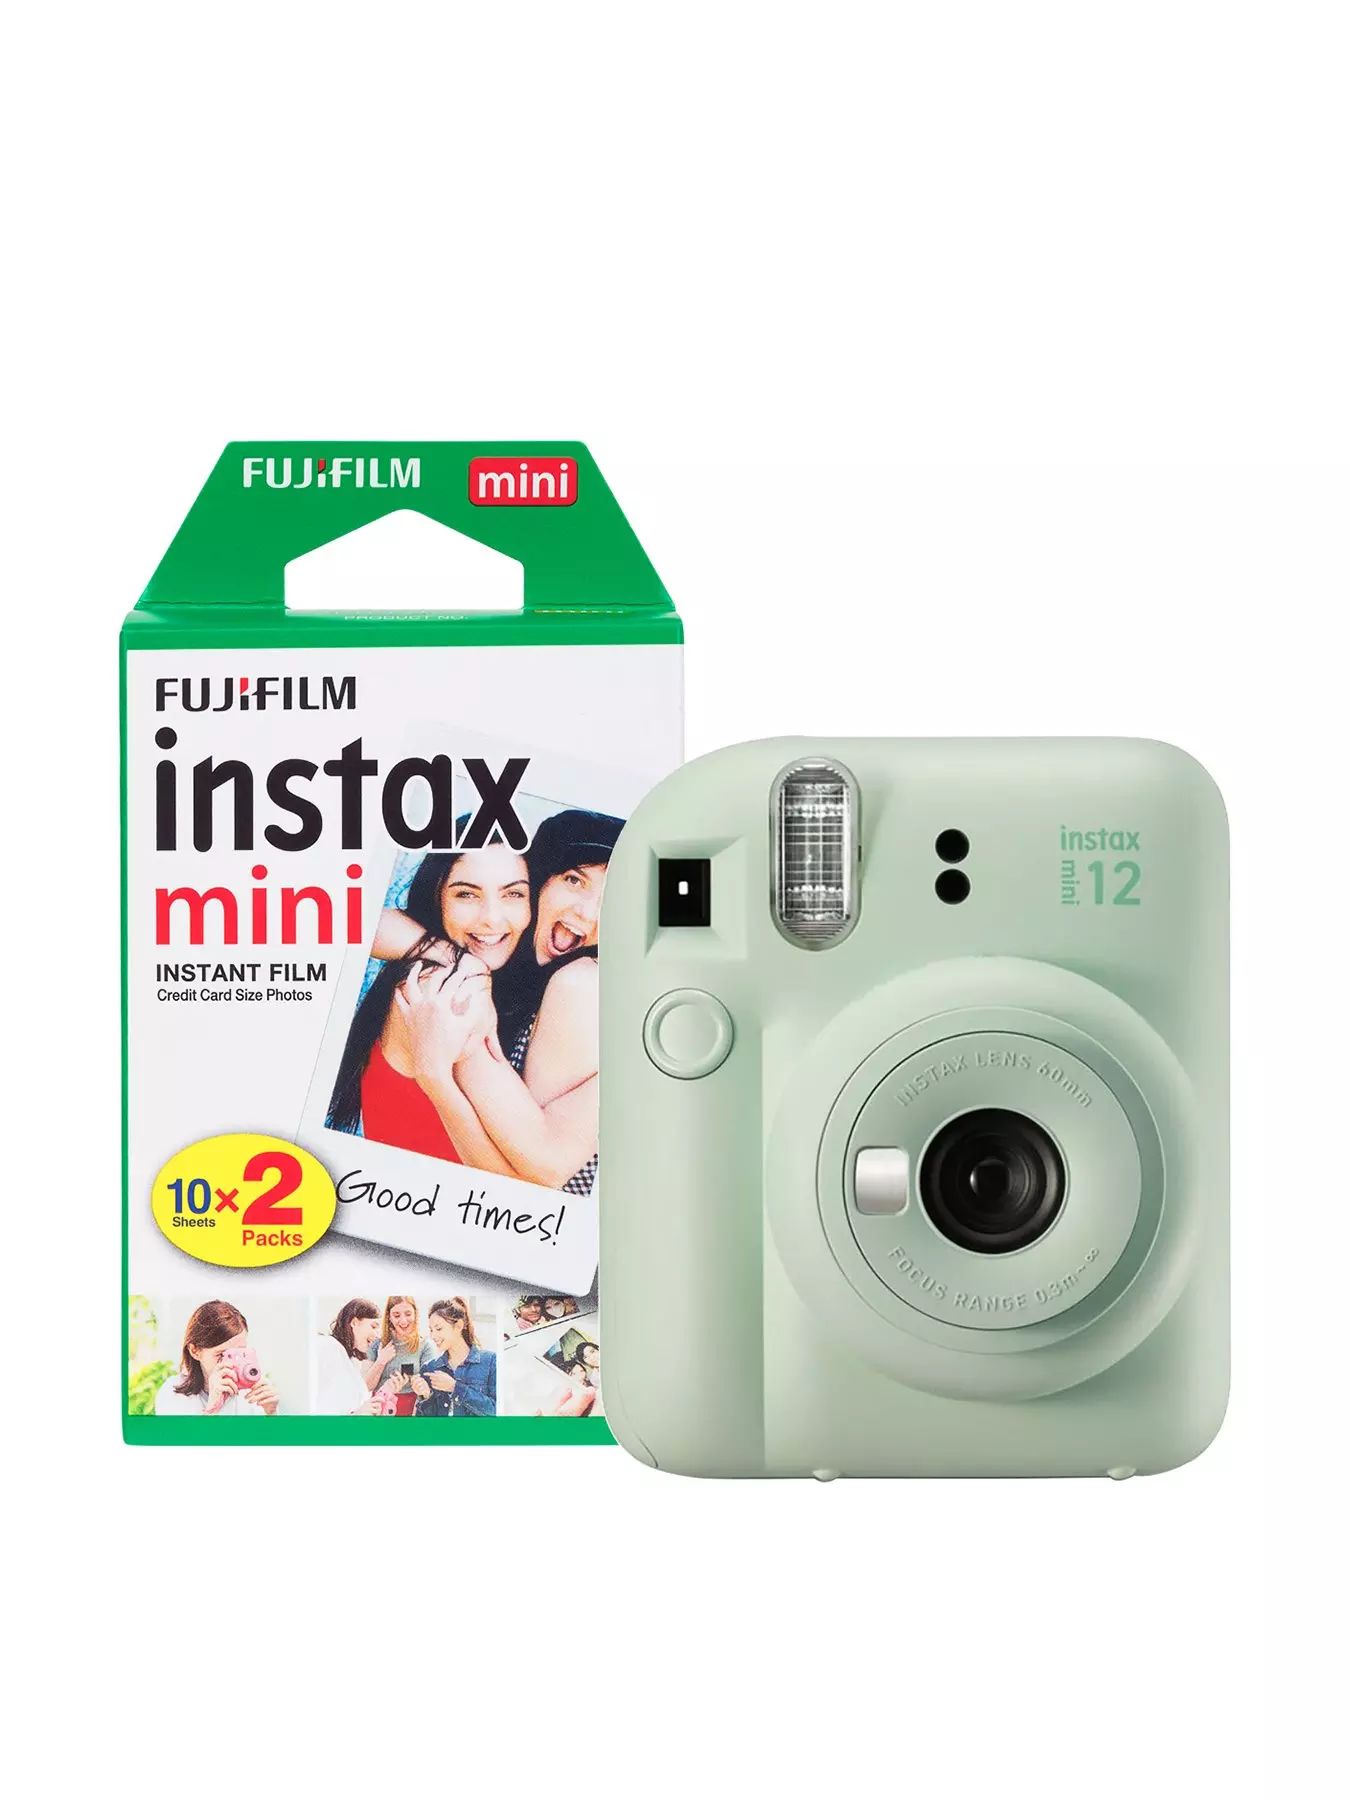 Review of the Fujifilm Instax Wide 300, by Thomas Smith